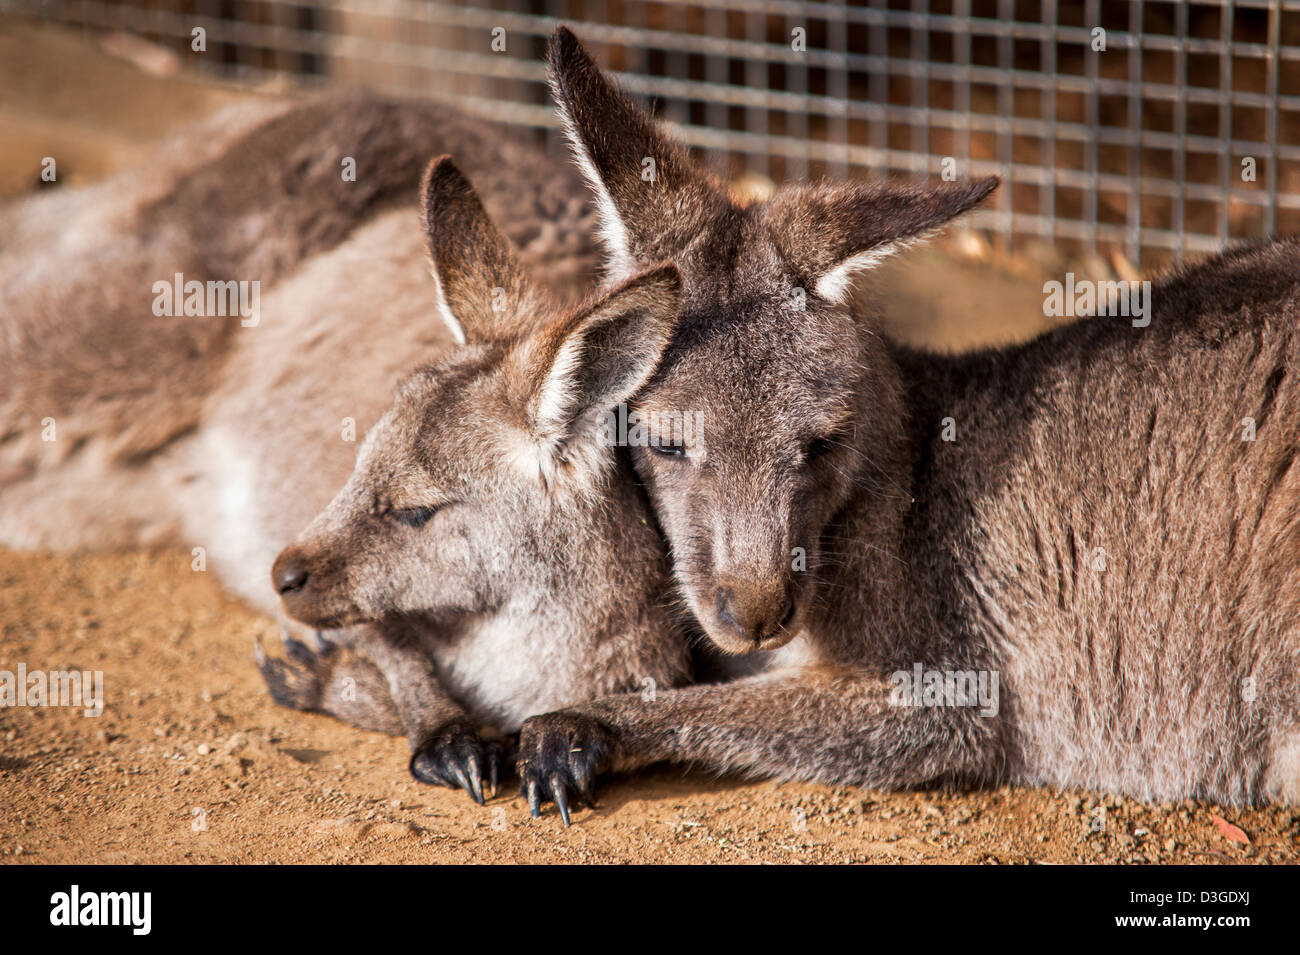 Two kangaroos embraced in a cute cuddle. Stock Photo